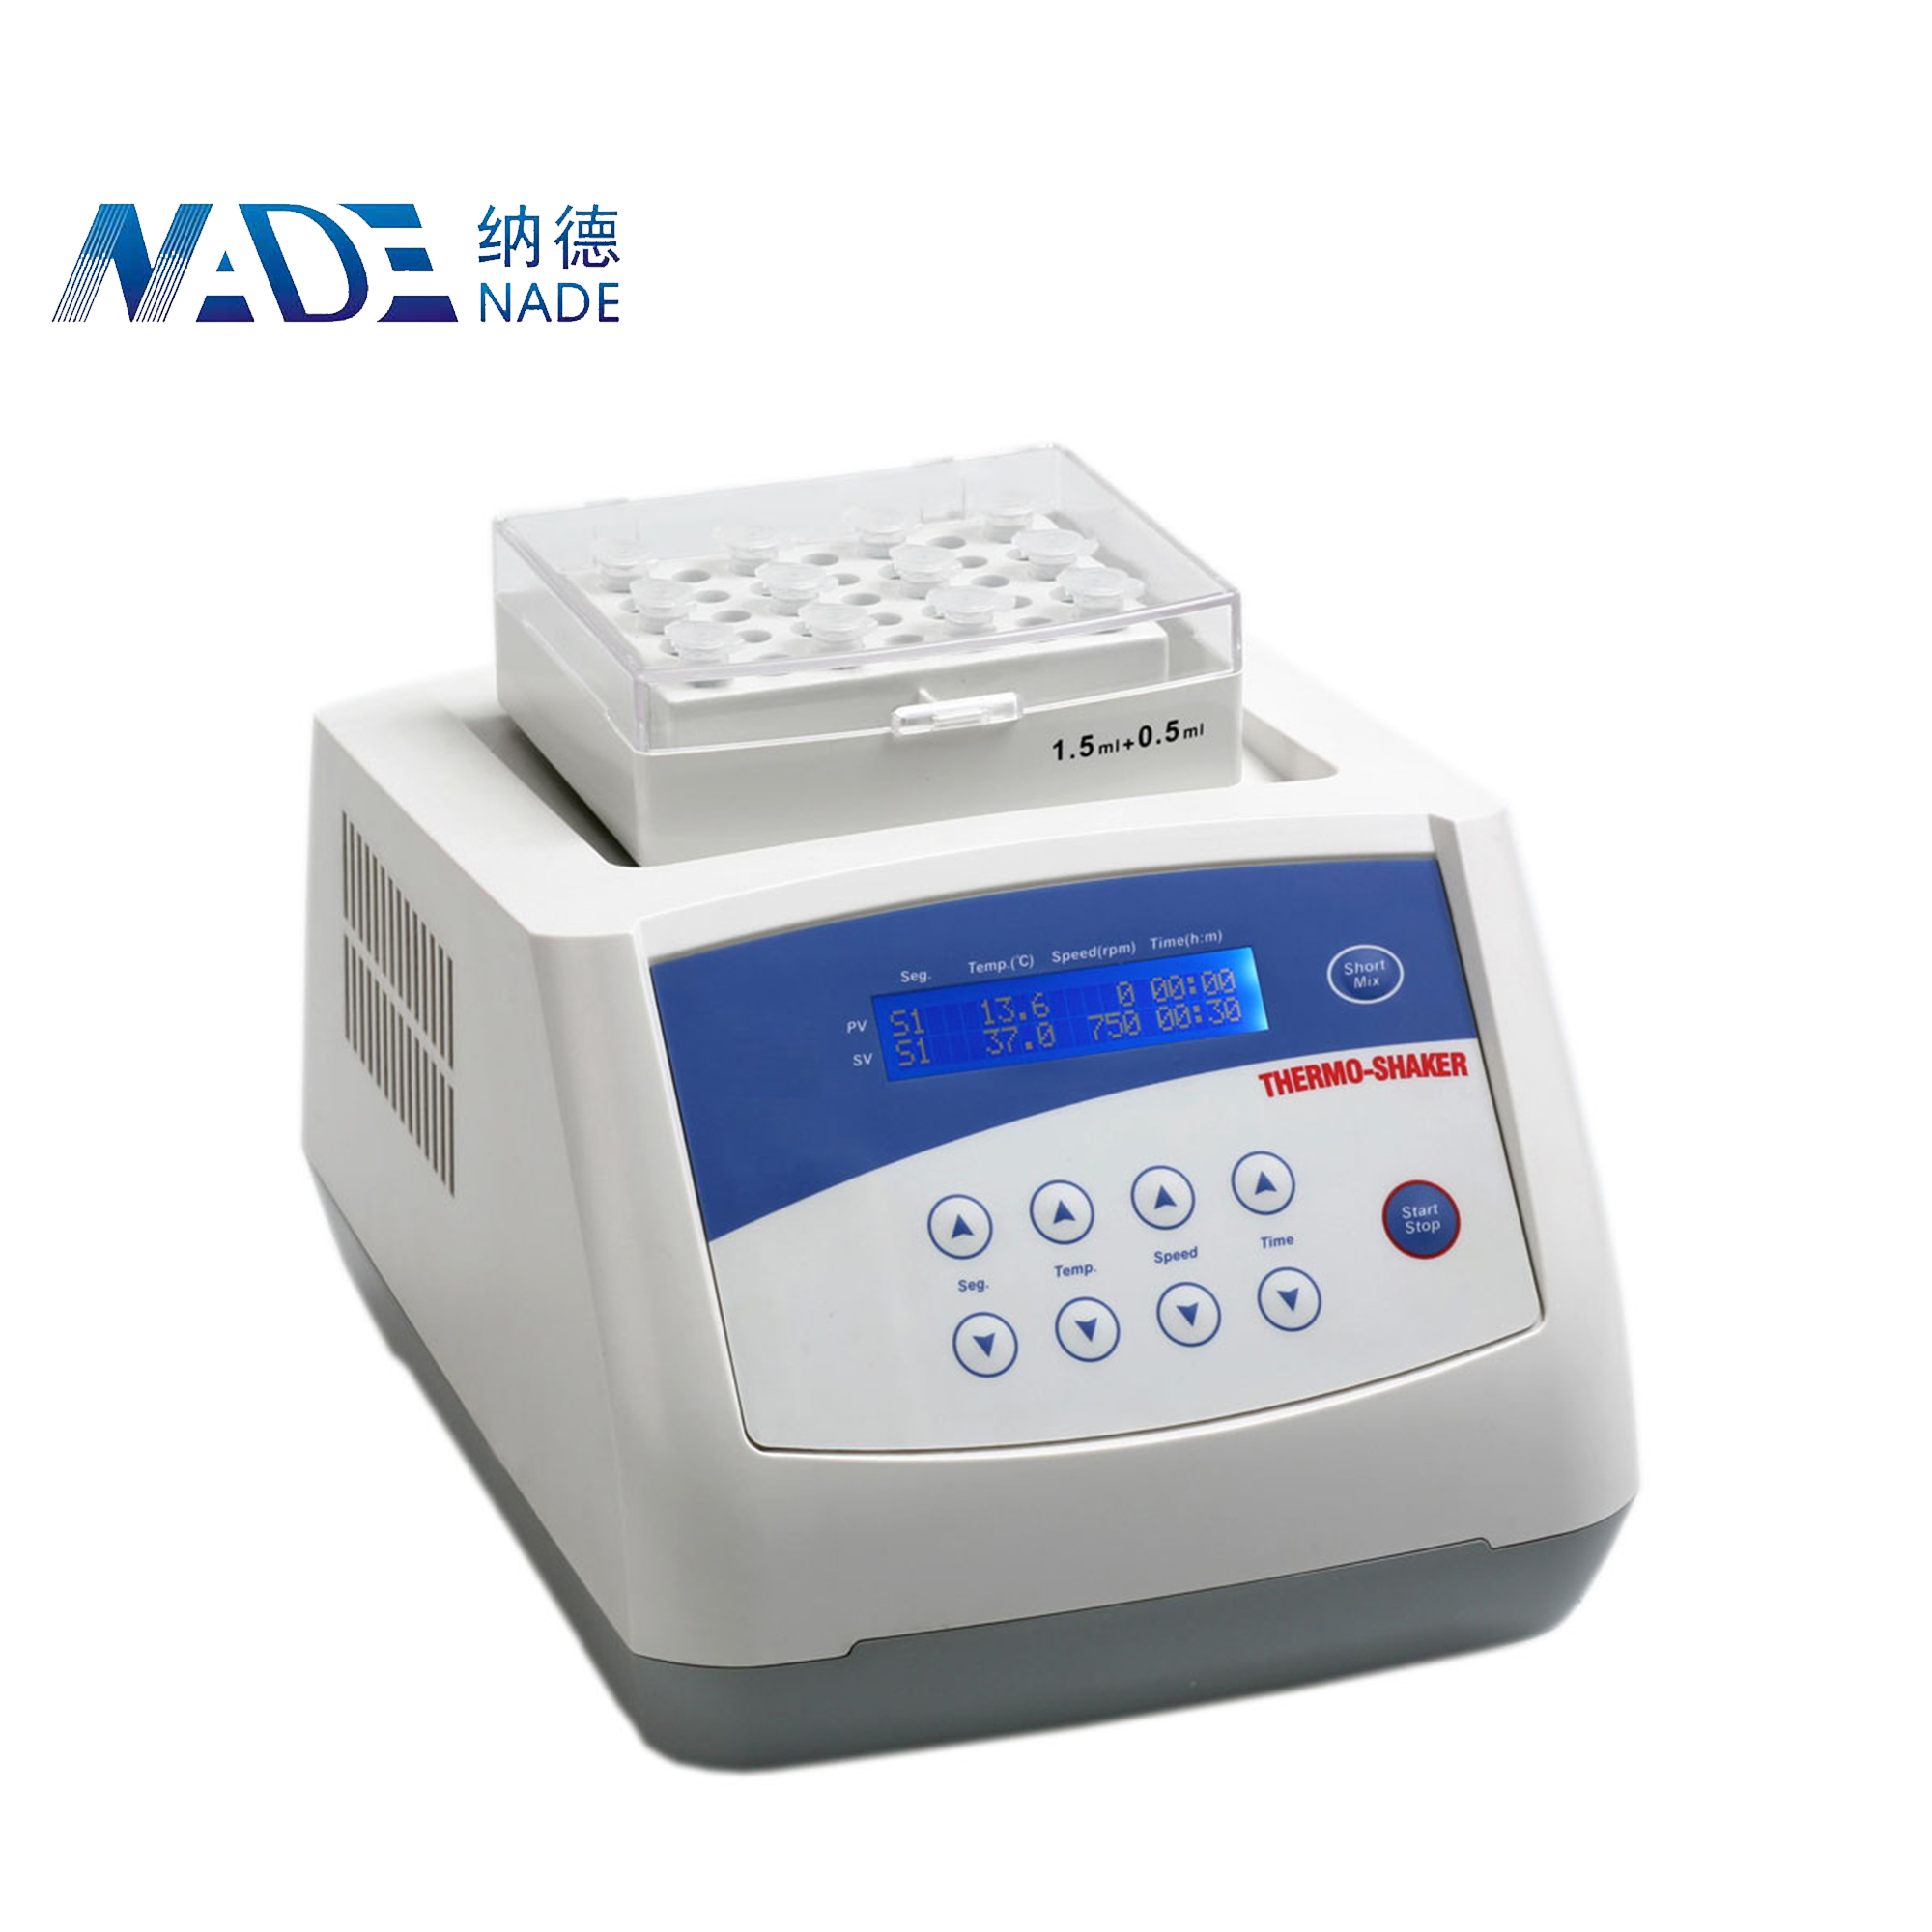 Nade Laboratory Dry Block Heaters Thermostatic Devices Dry Bath incubator MK20 -10~100C